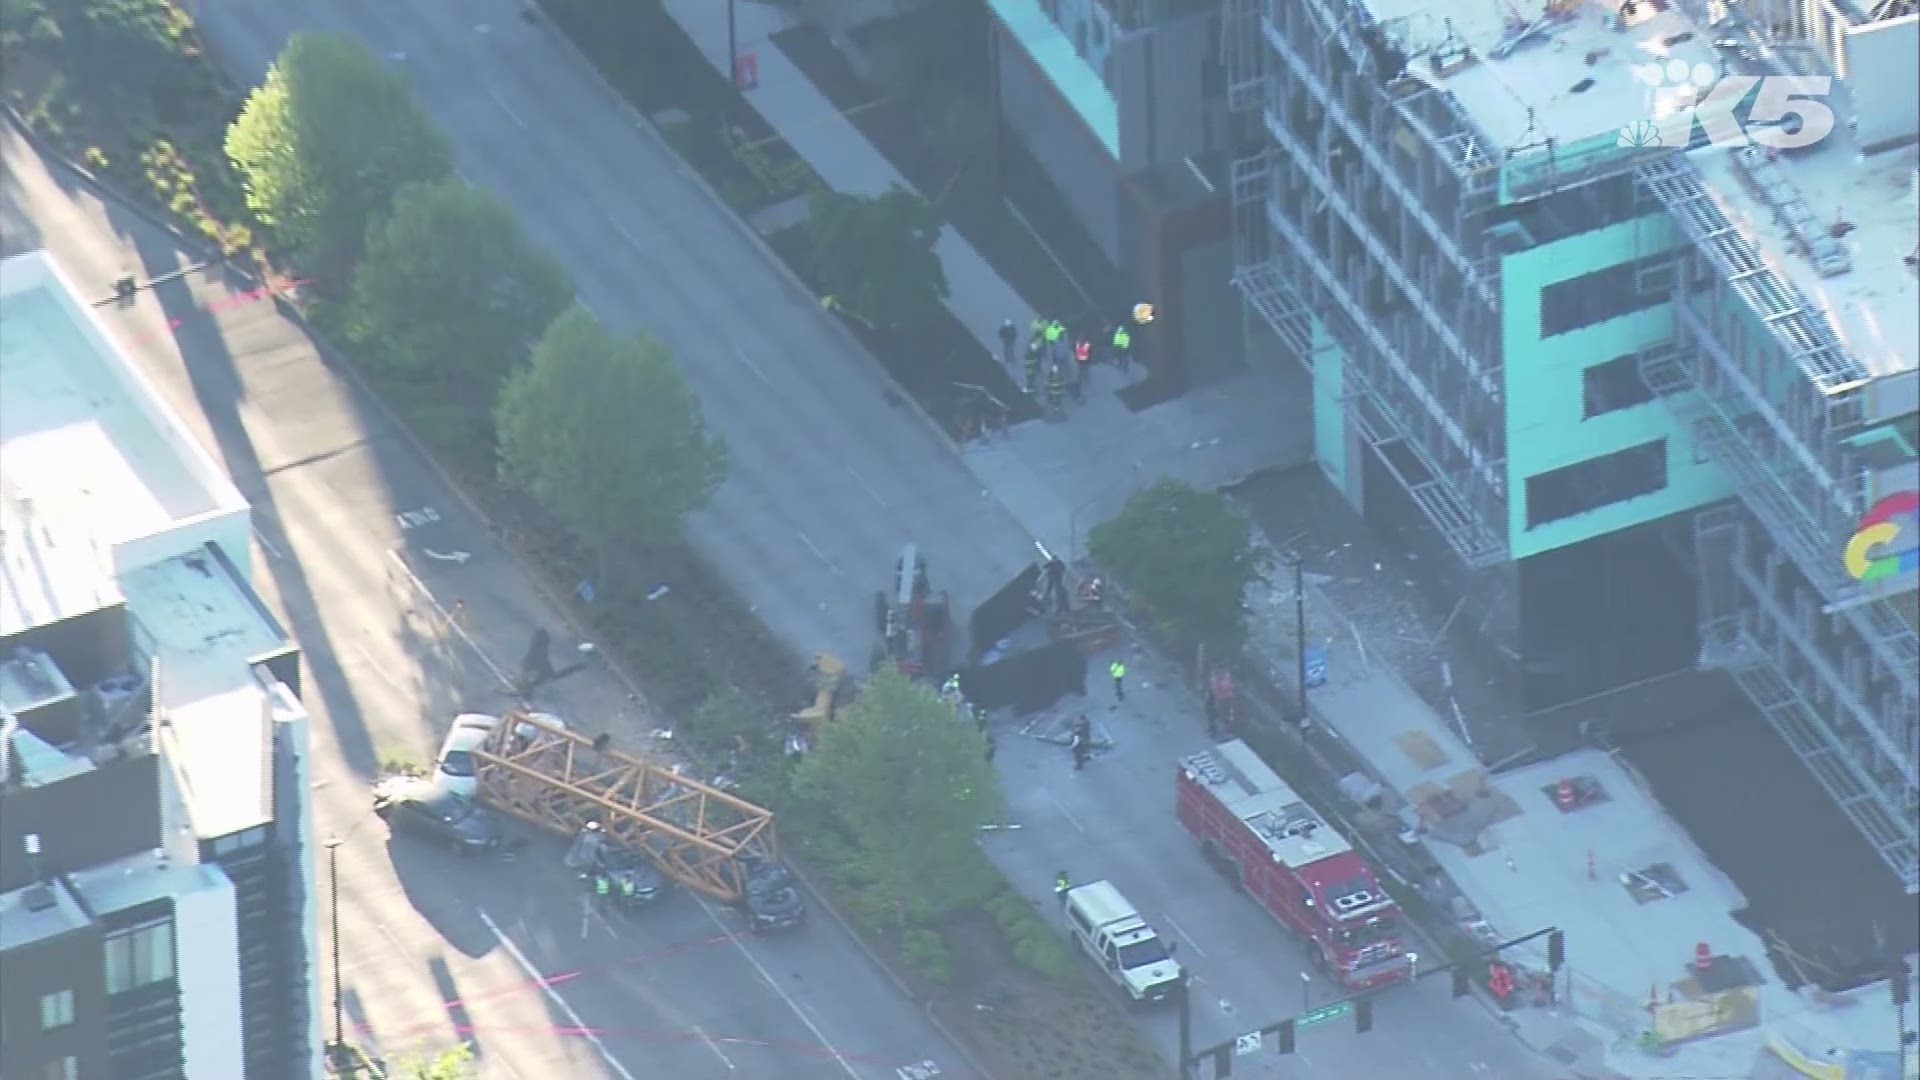 Construction crane collapsed in downtown Seattle killing four people and injuring another four.